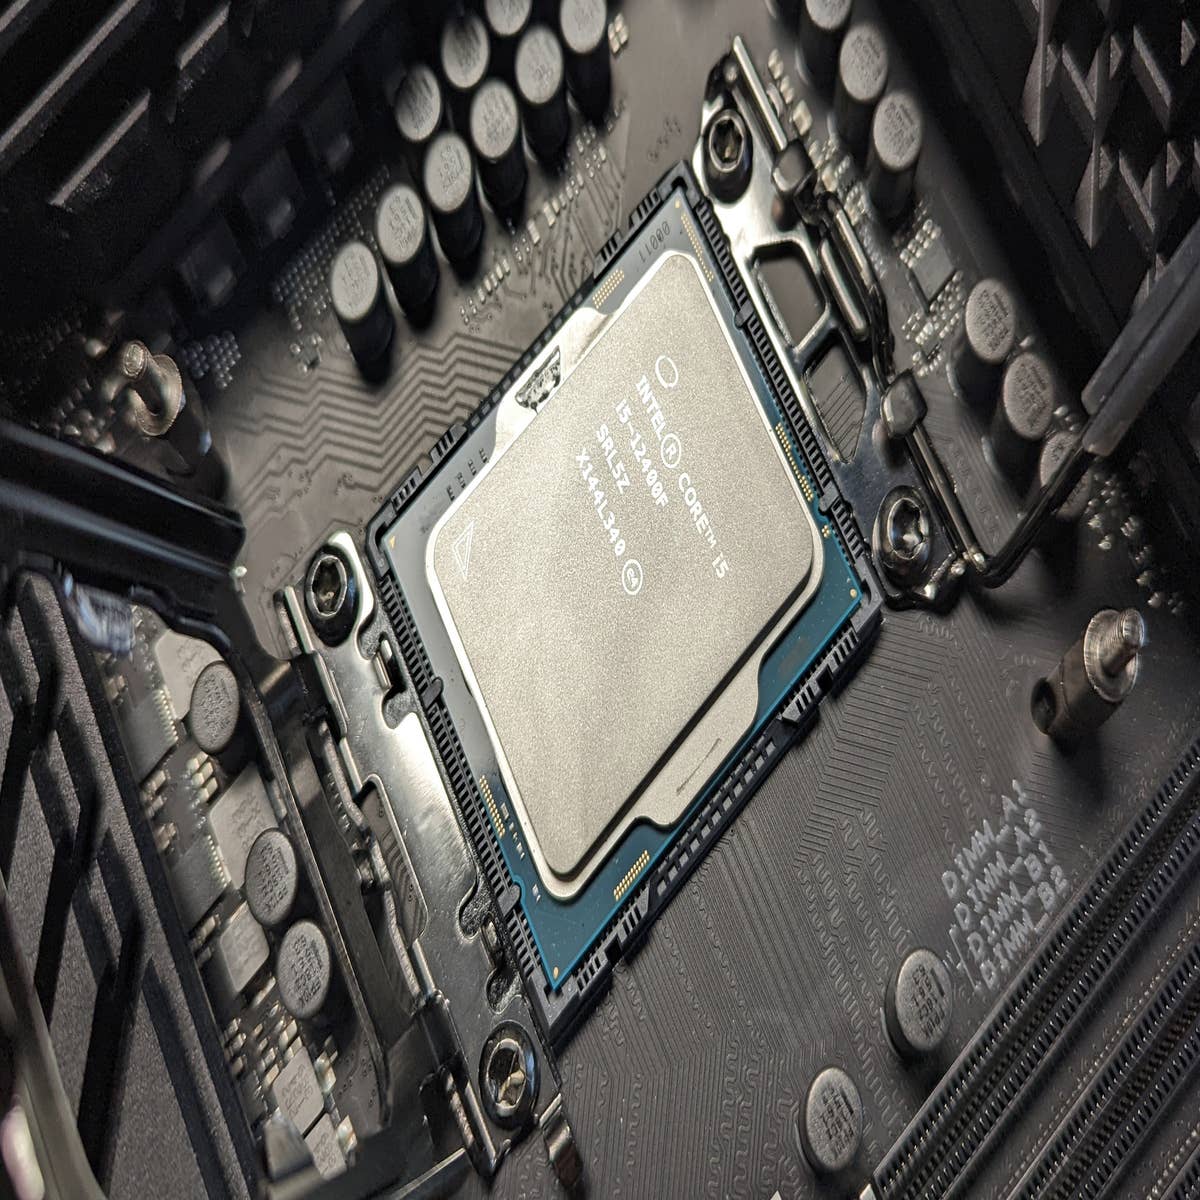 Intel i5-12600K Review - TWO CPUS IN ONE TESTED FULLY! 